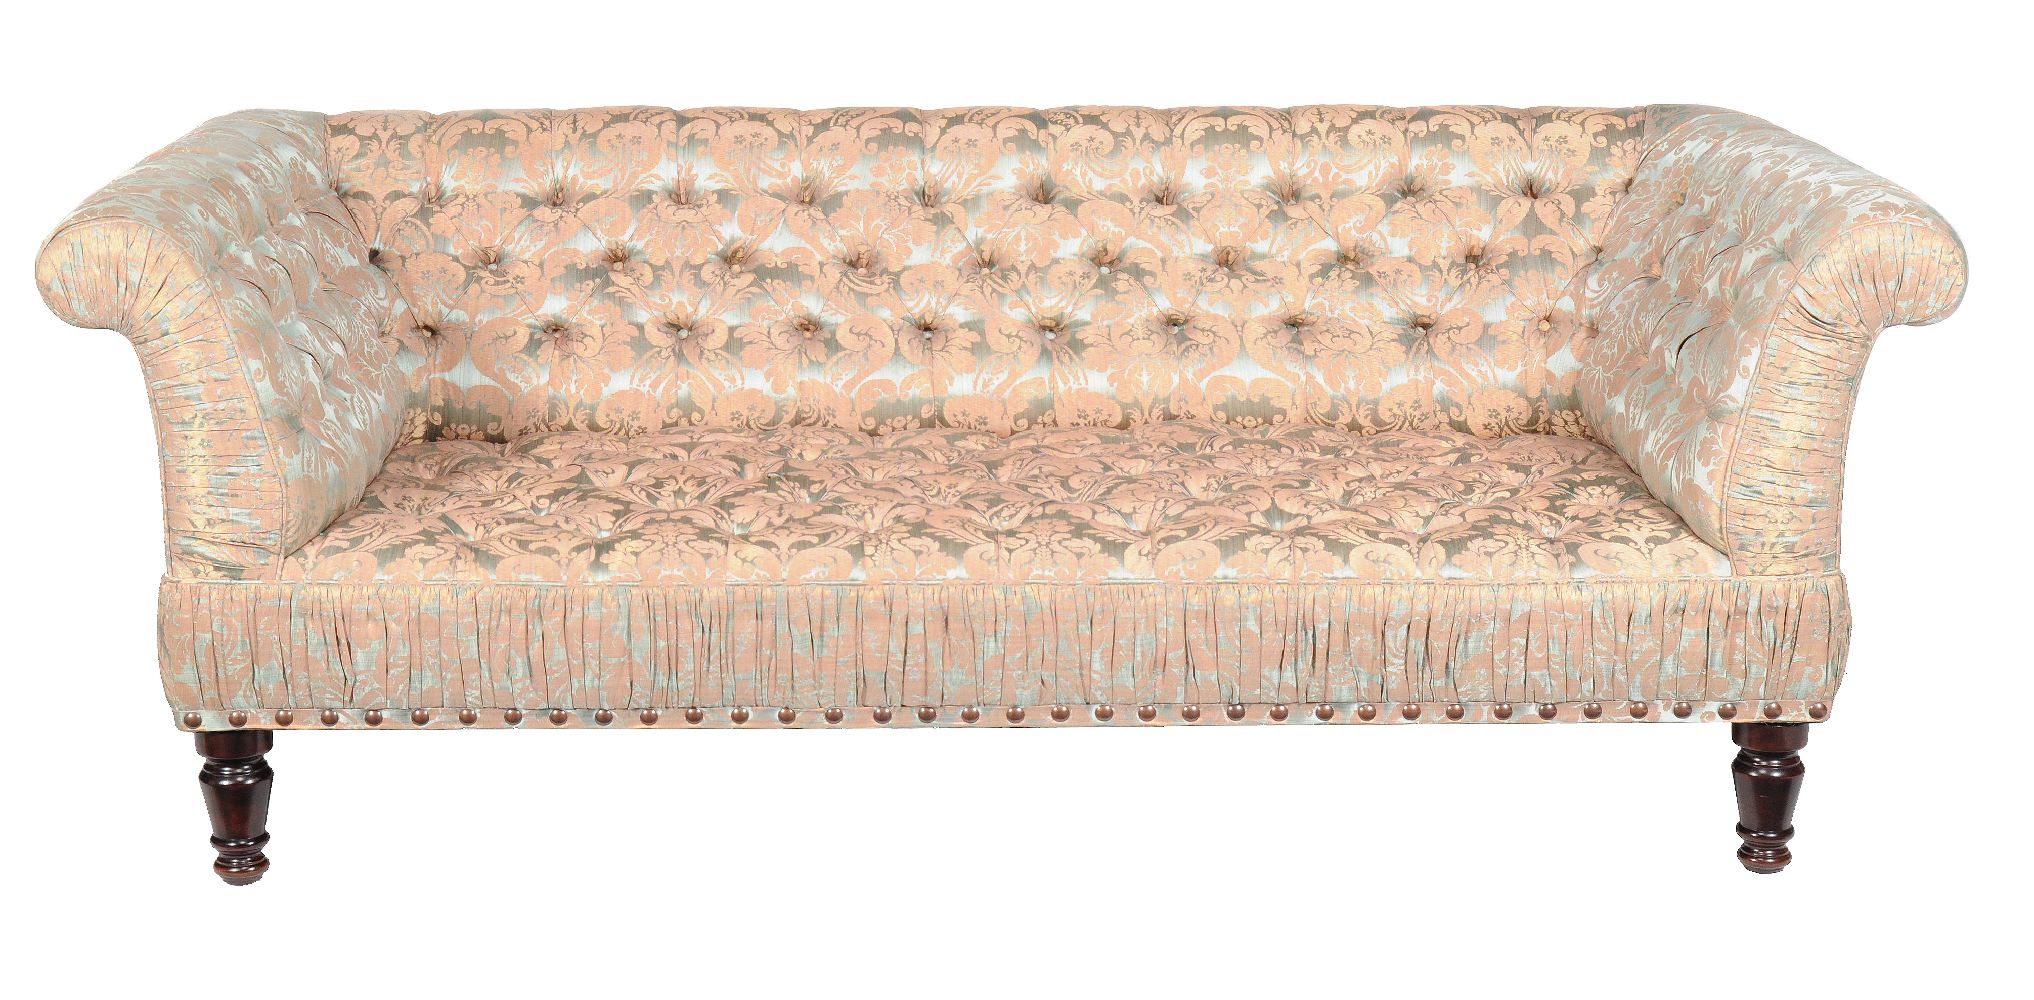 A mahogany and upholstered sofa in Victorian style